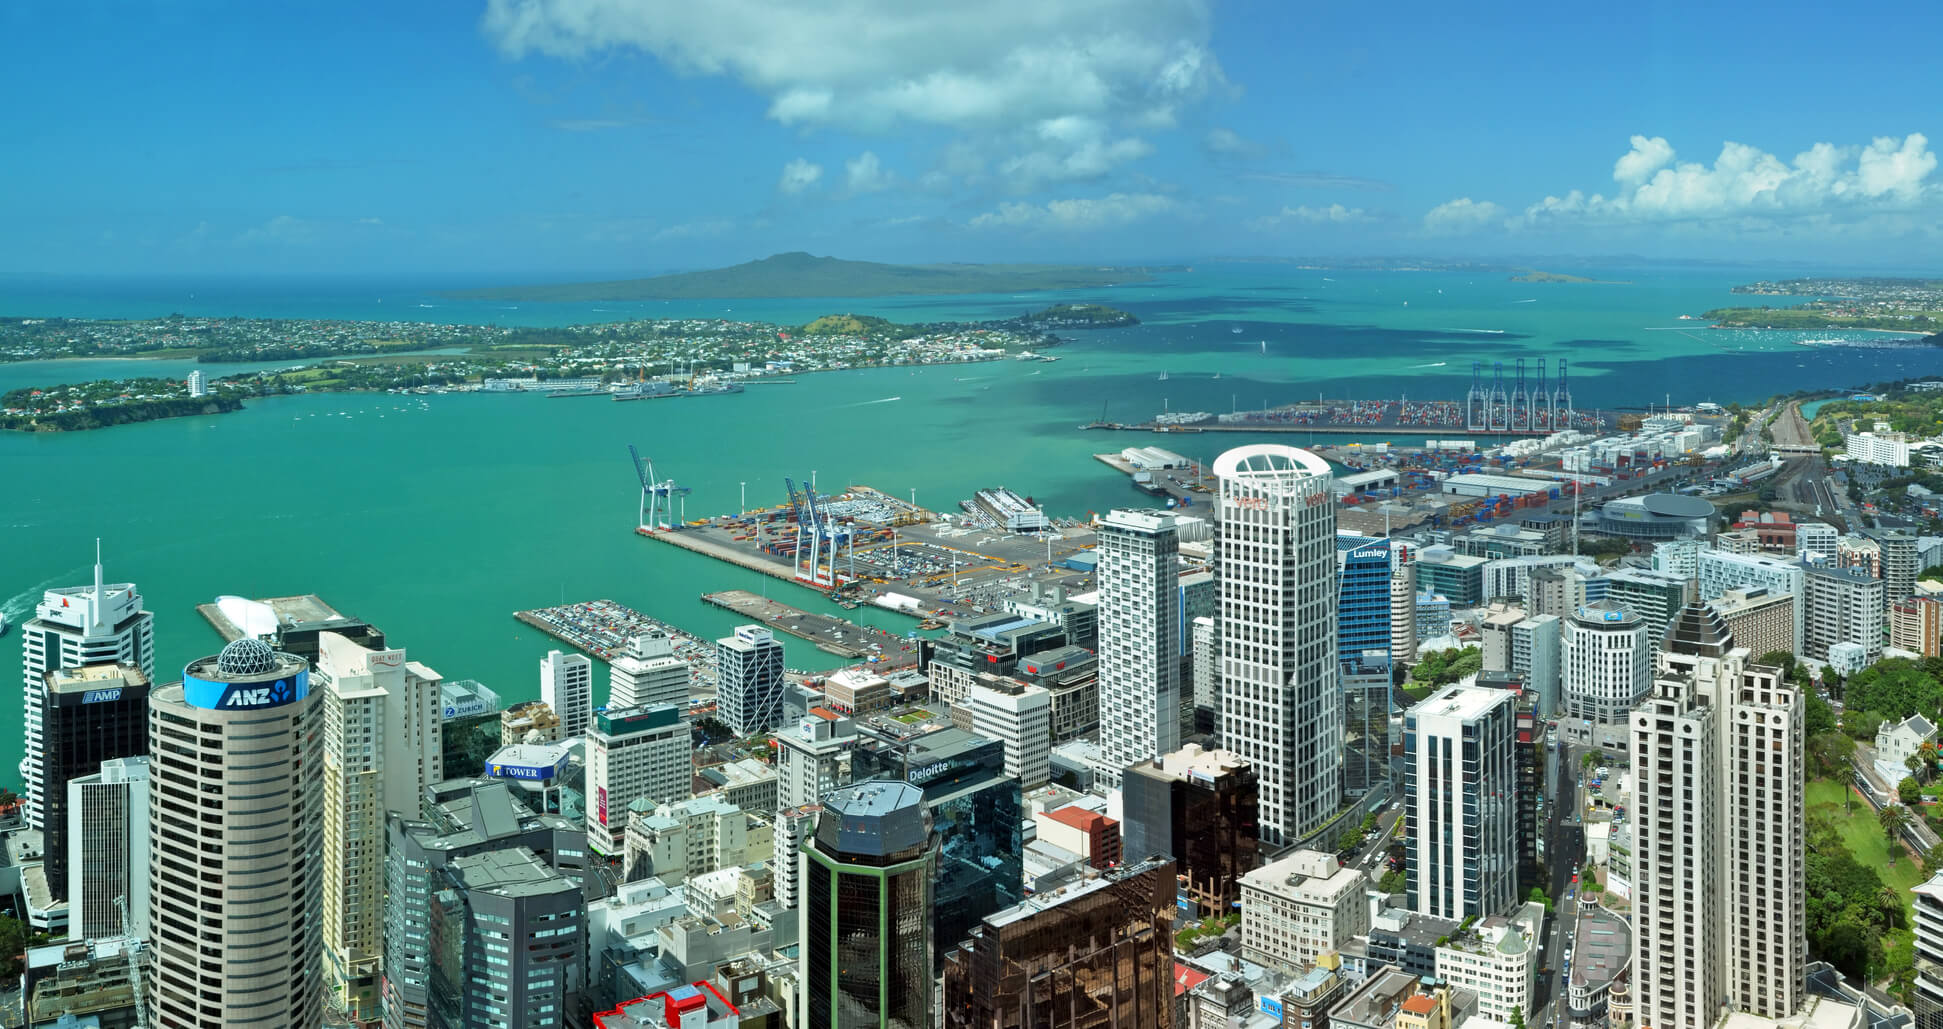 Flight deals from many Canadian cities to Auckland, New Zealand | Secret Flying